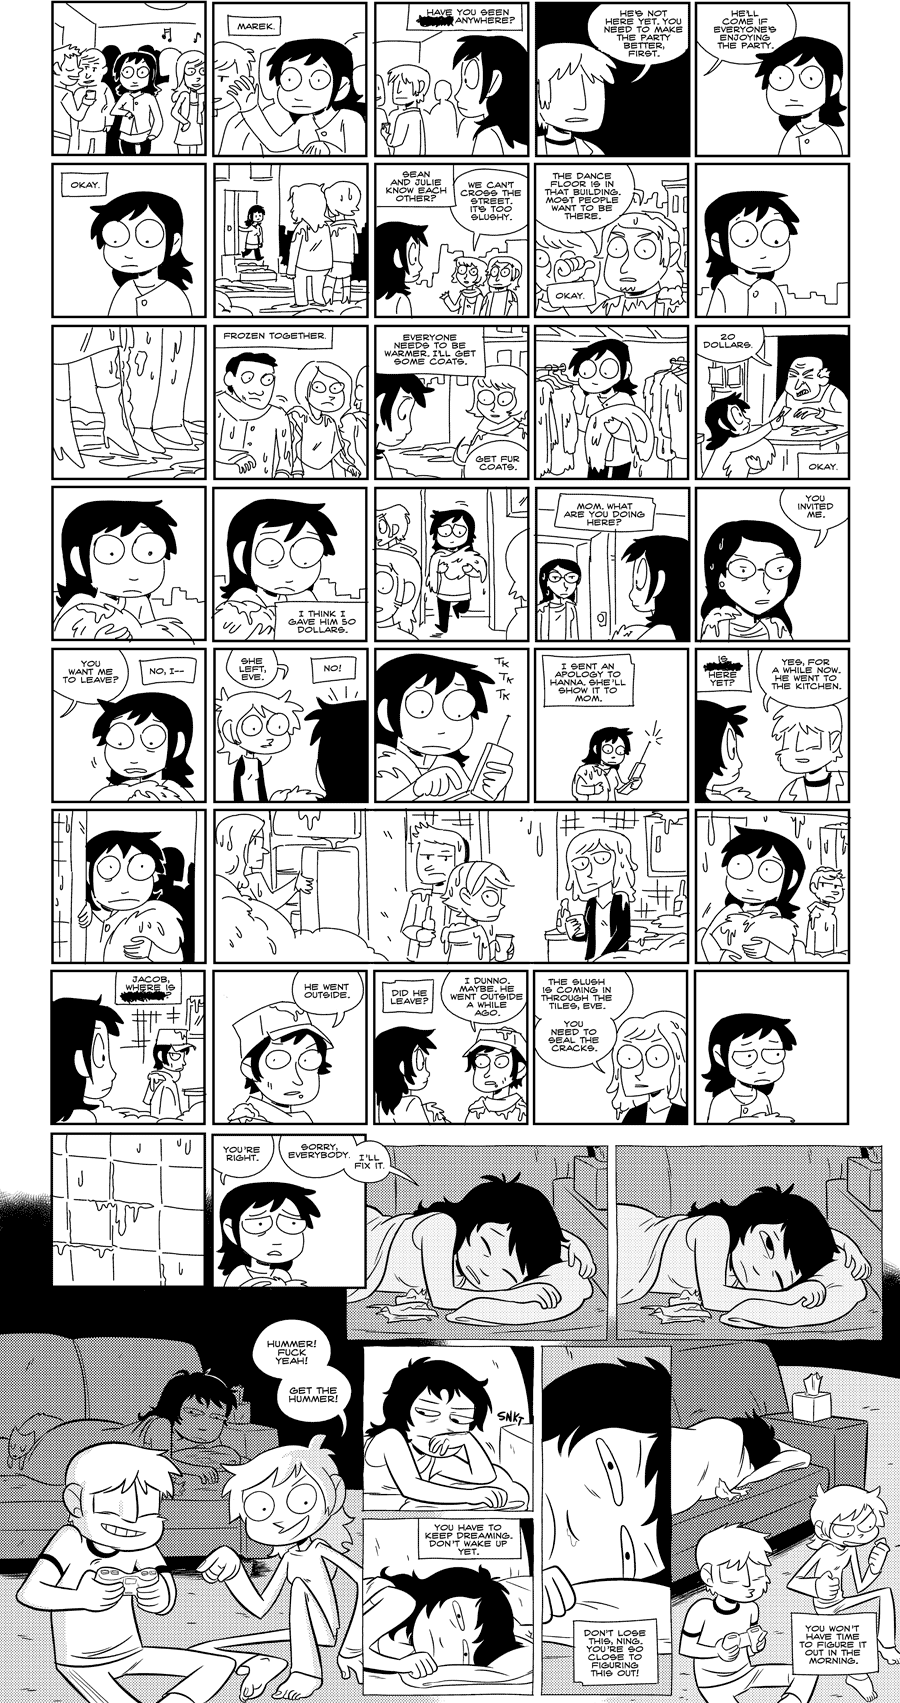 #427 – the fever dreams of everest ning